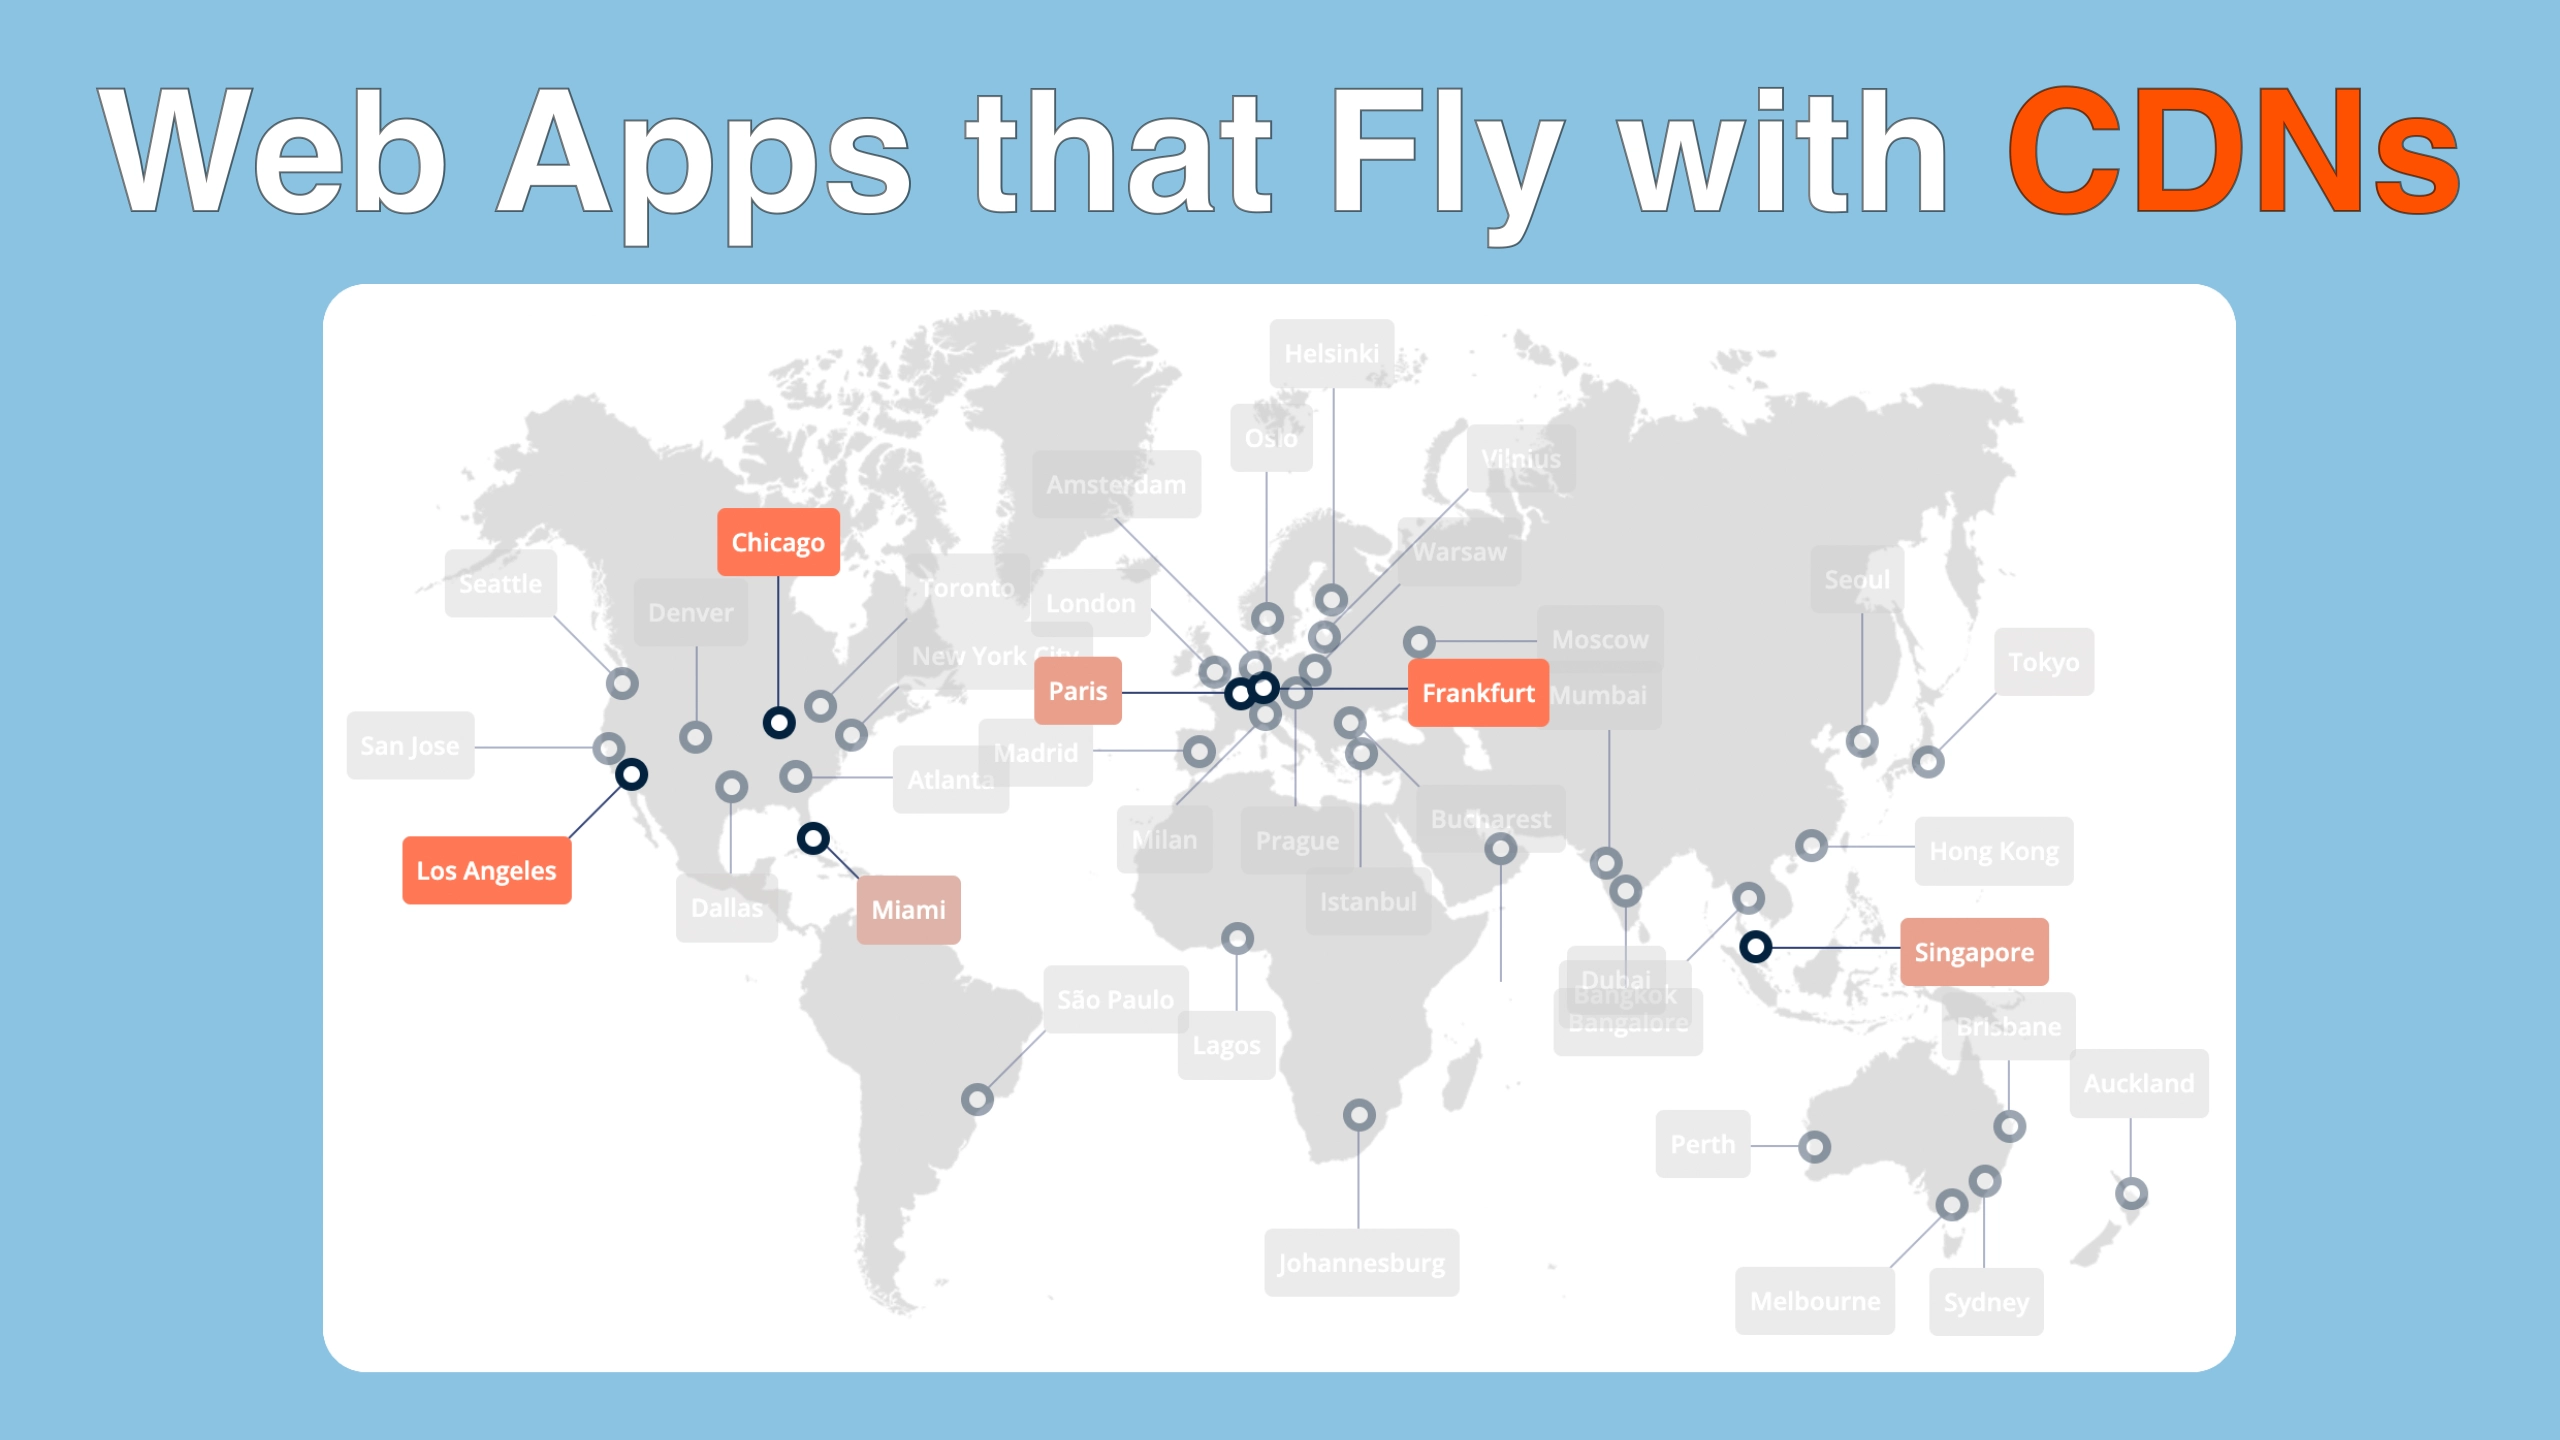 Course: Web Apps that Fly with CDNs